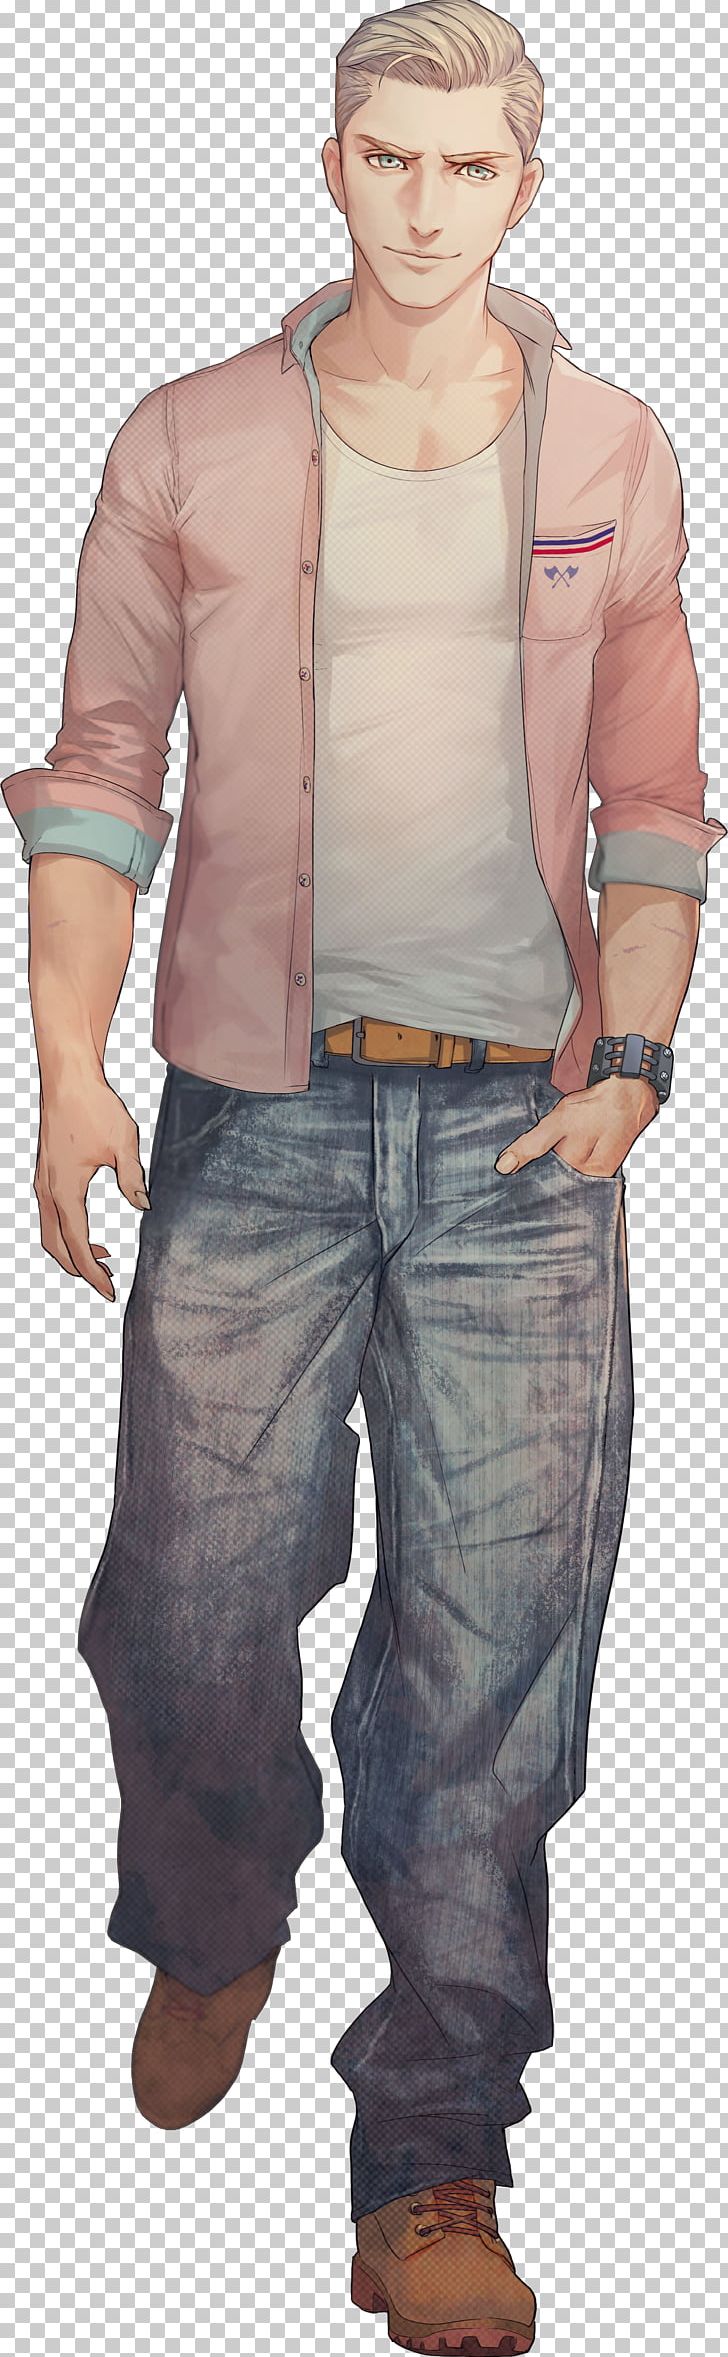 Tomokazu Sugita Zero Time Dilemma Nine Hours PNG, Clipart, Adventure Game, Game, Jeans, Joint, Male Free PNG Download